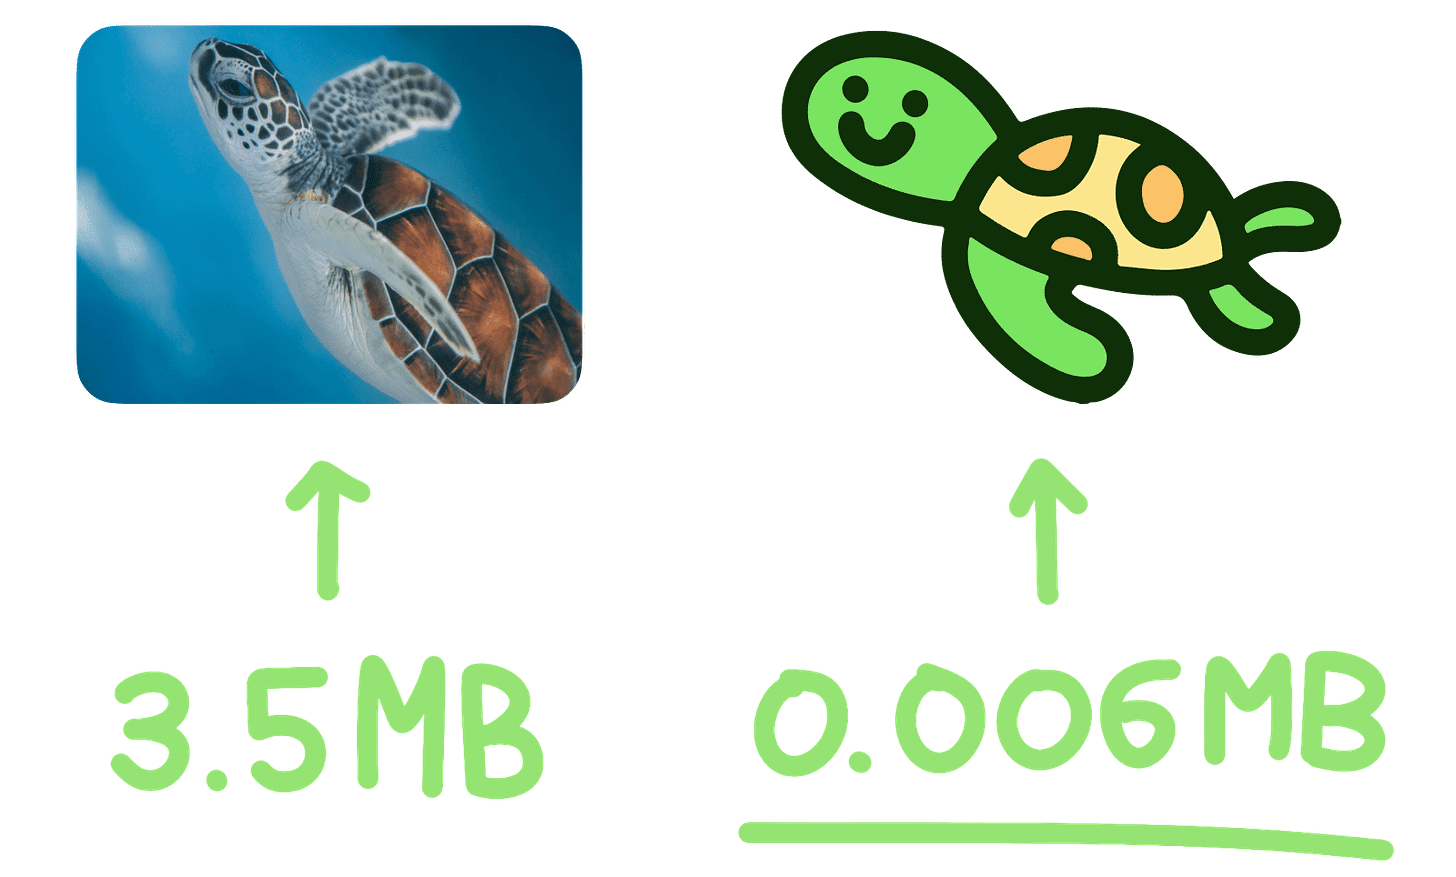 An image showing a photograph of a turtle, labelled 3.5 megabytes. Next to it is an illustration of a cute turtle, labelled 0.006 megabytes.